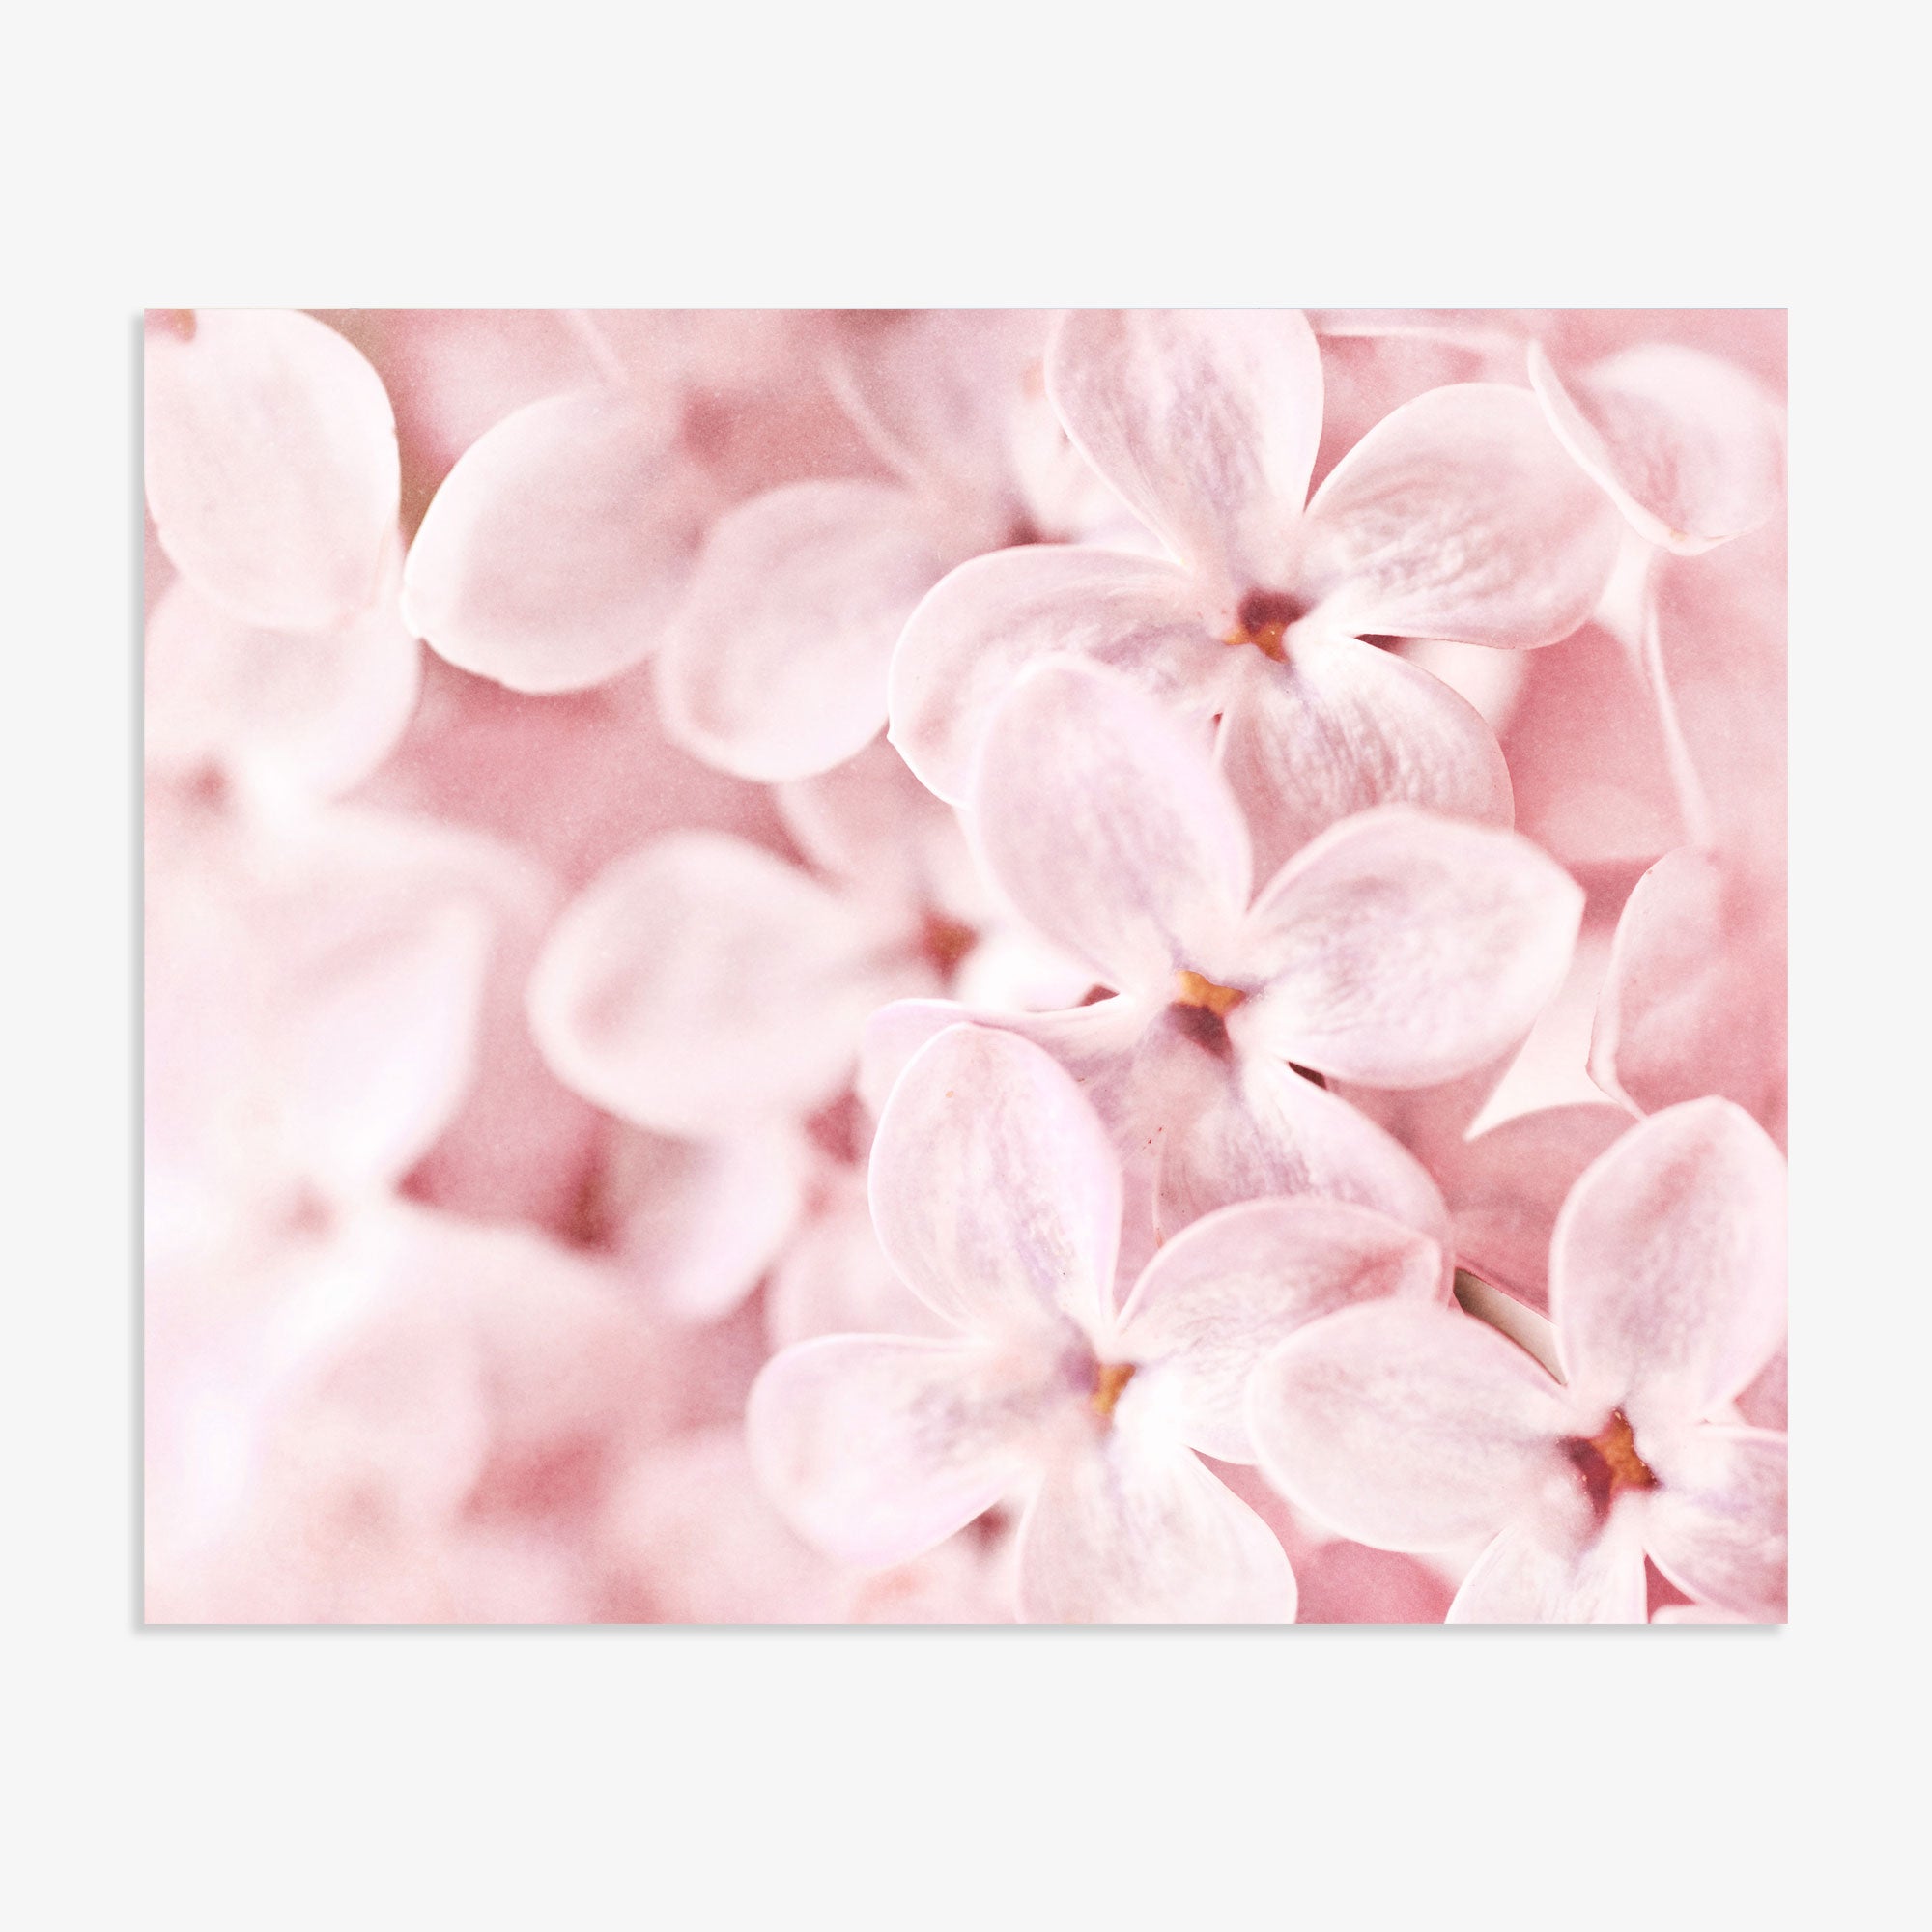 Close-up of Pink Botanical Print, &#39;Bed of Lilacs&#39; by Offley Green with a soft focus background, highlighting the delicate textures and pastel tones of the petals, printed on archival photographic paper.